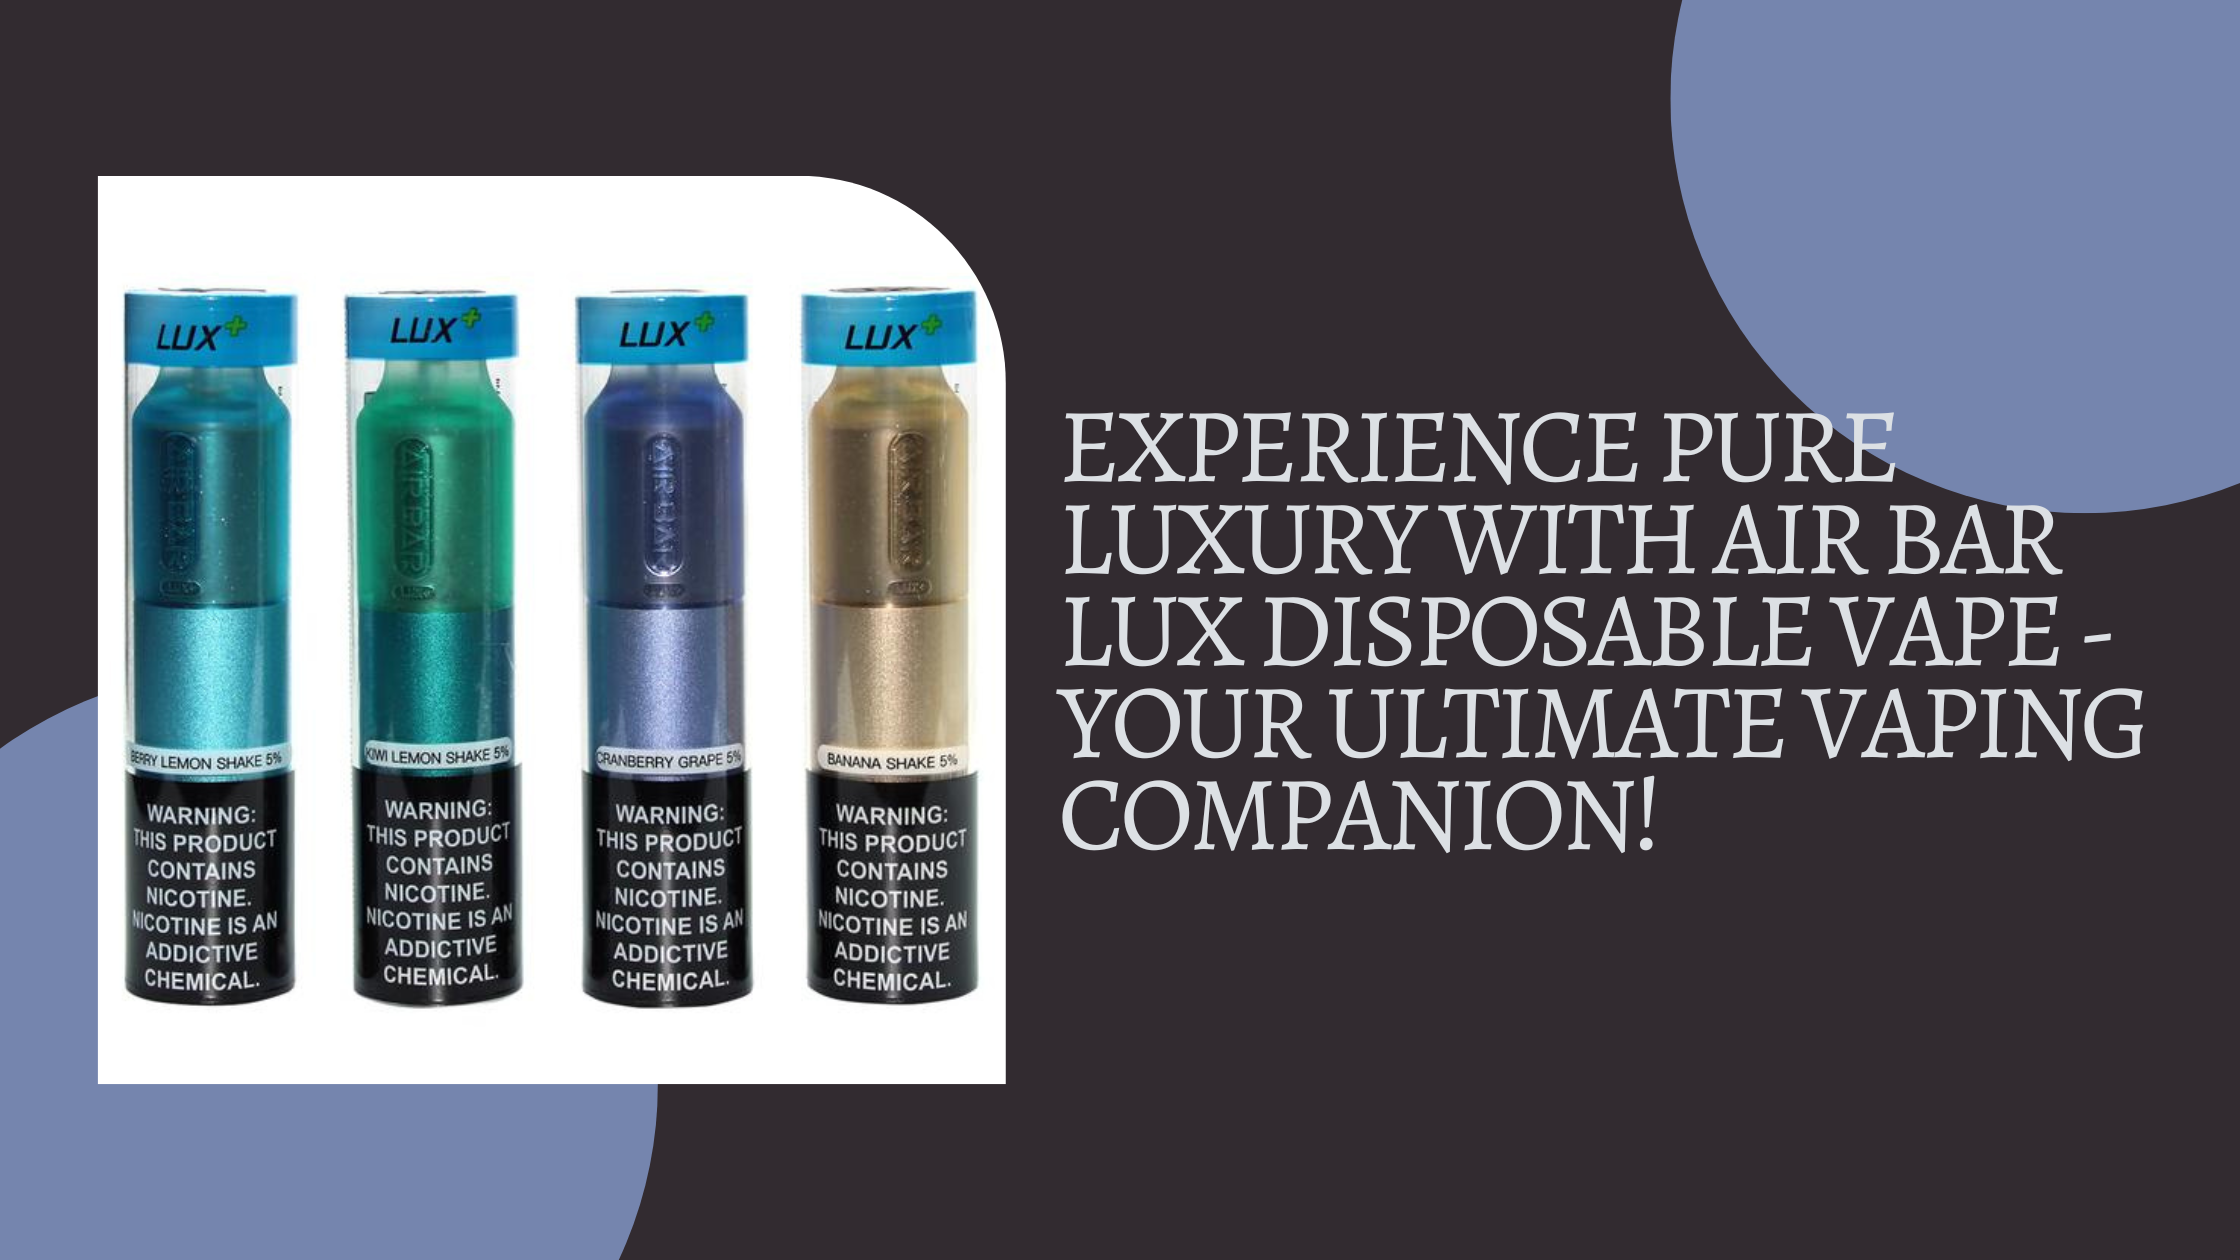 Experience Pure Luxury with Air Bar Lux Disposable Vape - Your Ultimate Vaping Companion!